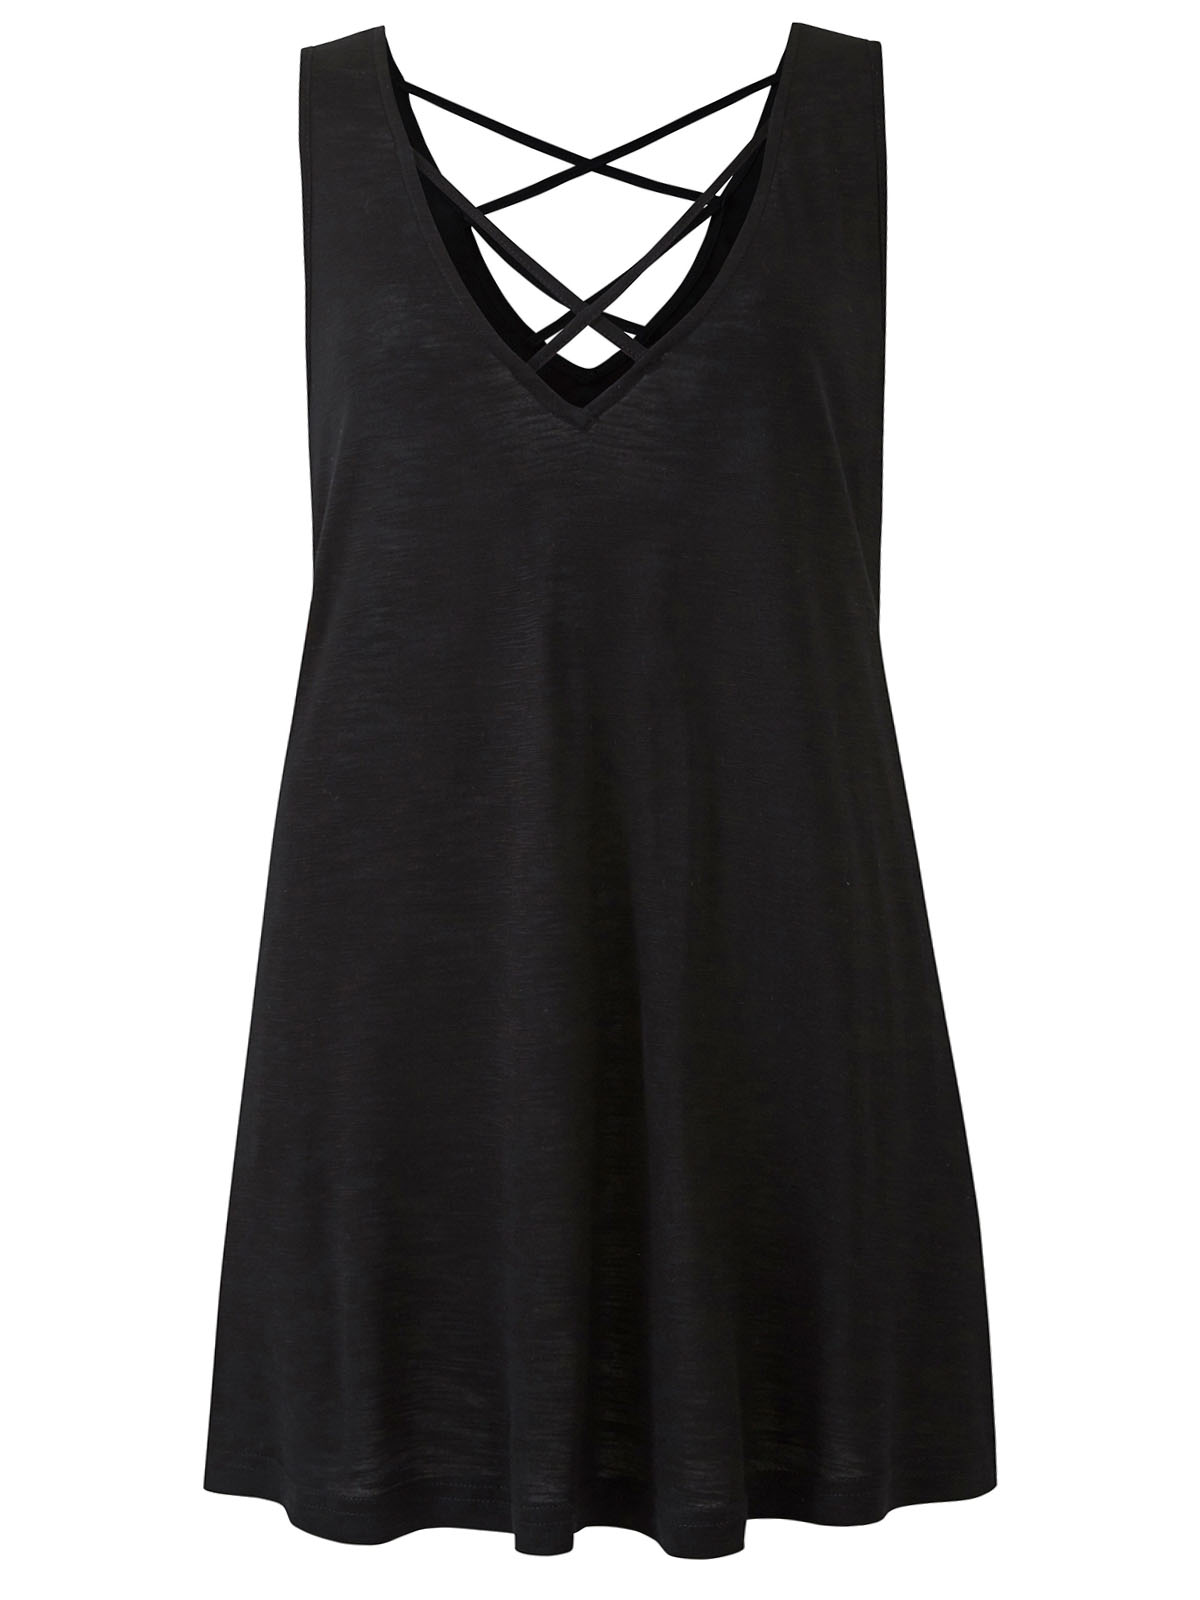 plus-size-wholesale-clothing-by-simply-be-black-sleeveless-criss